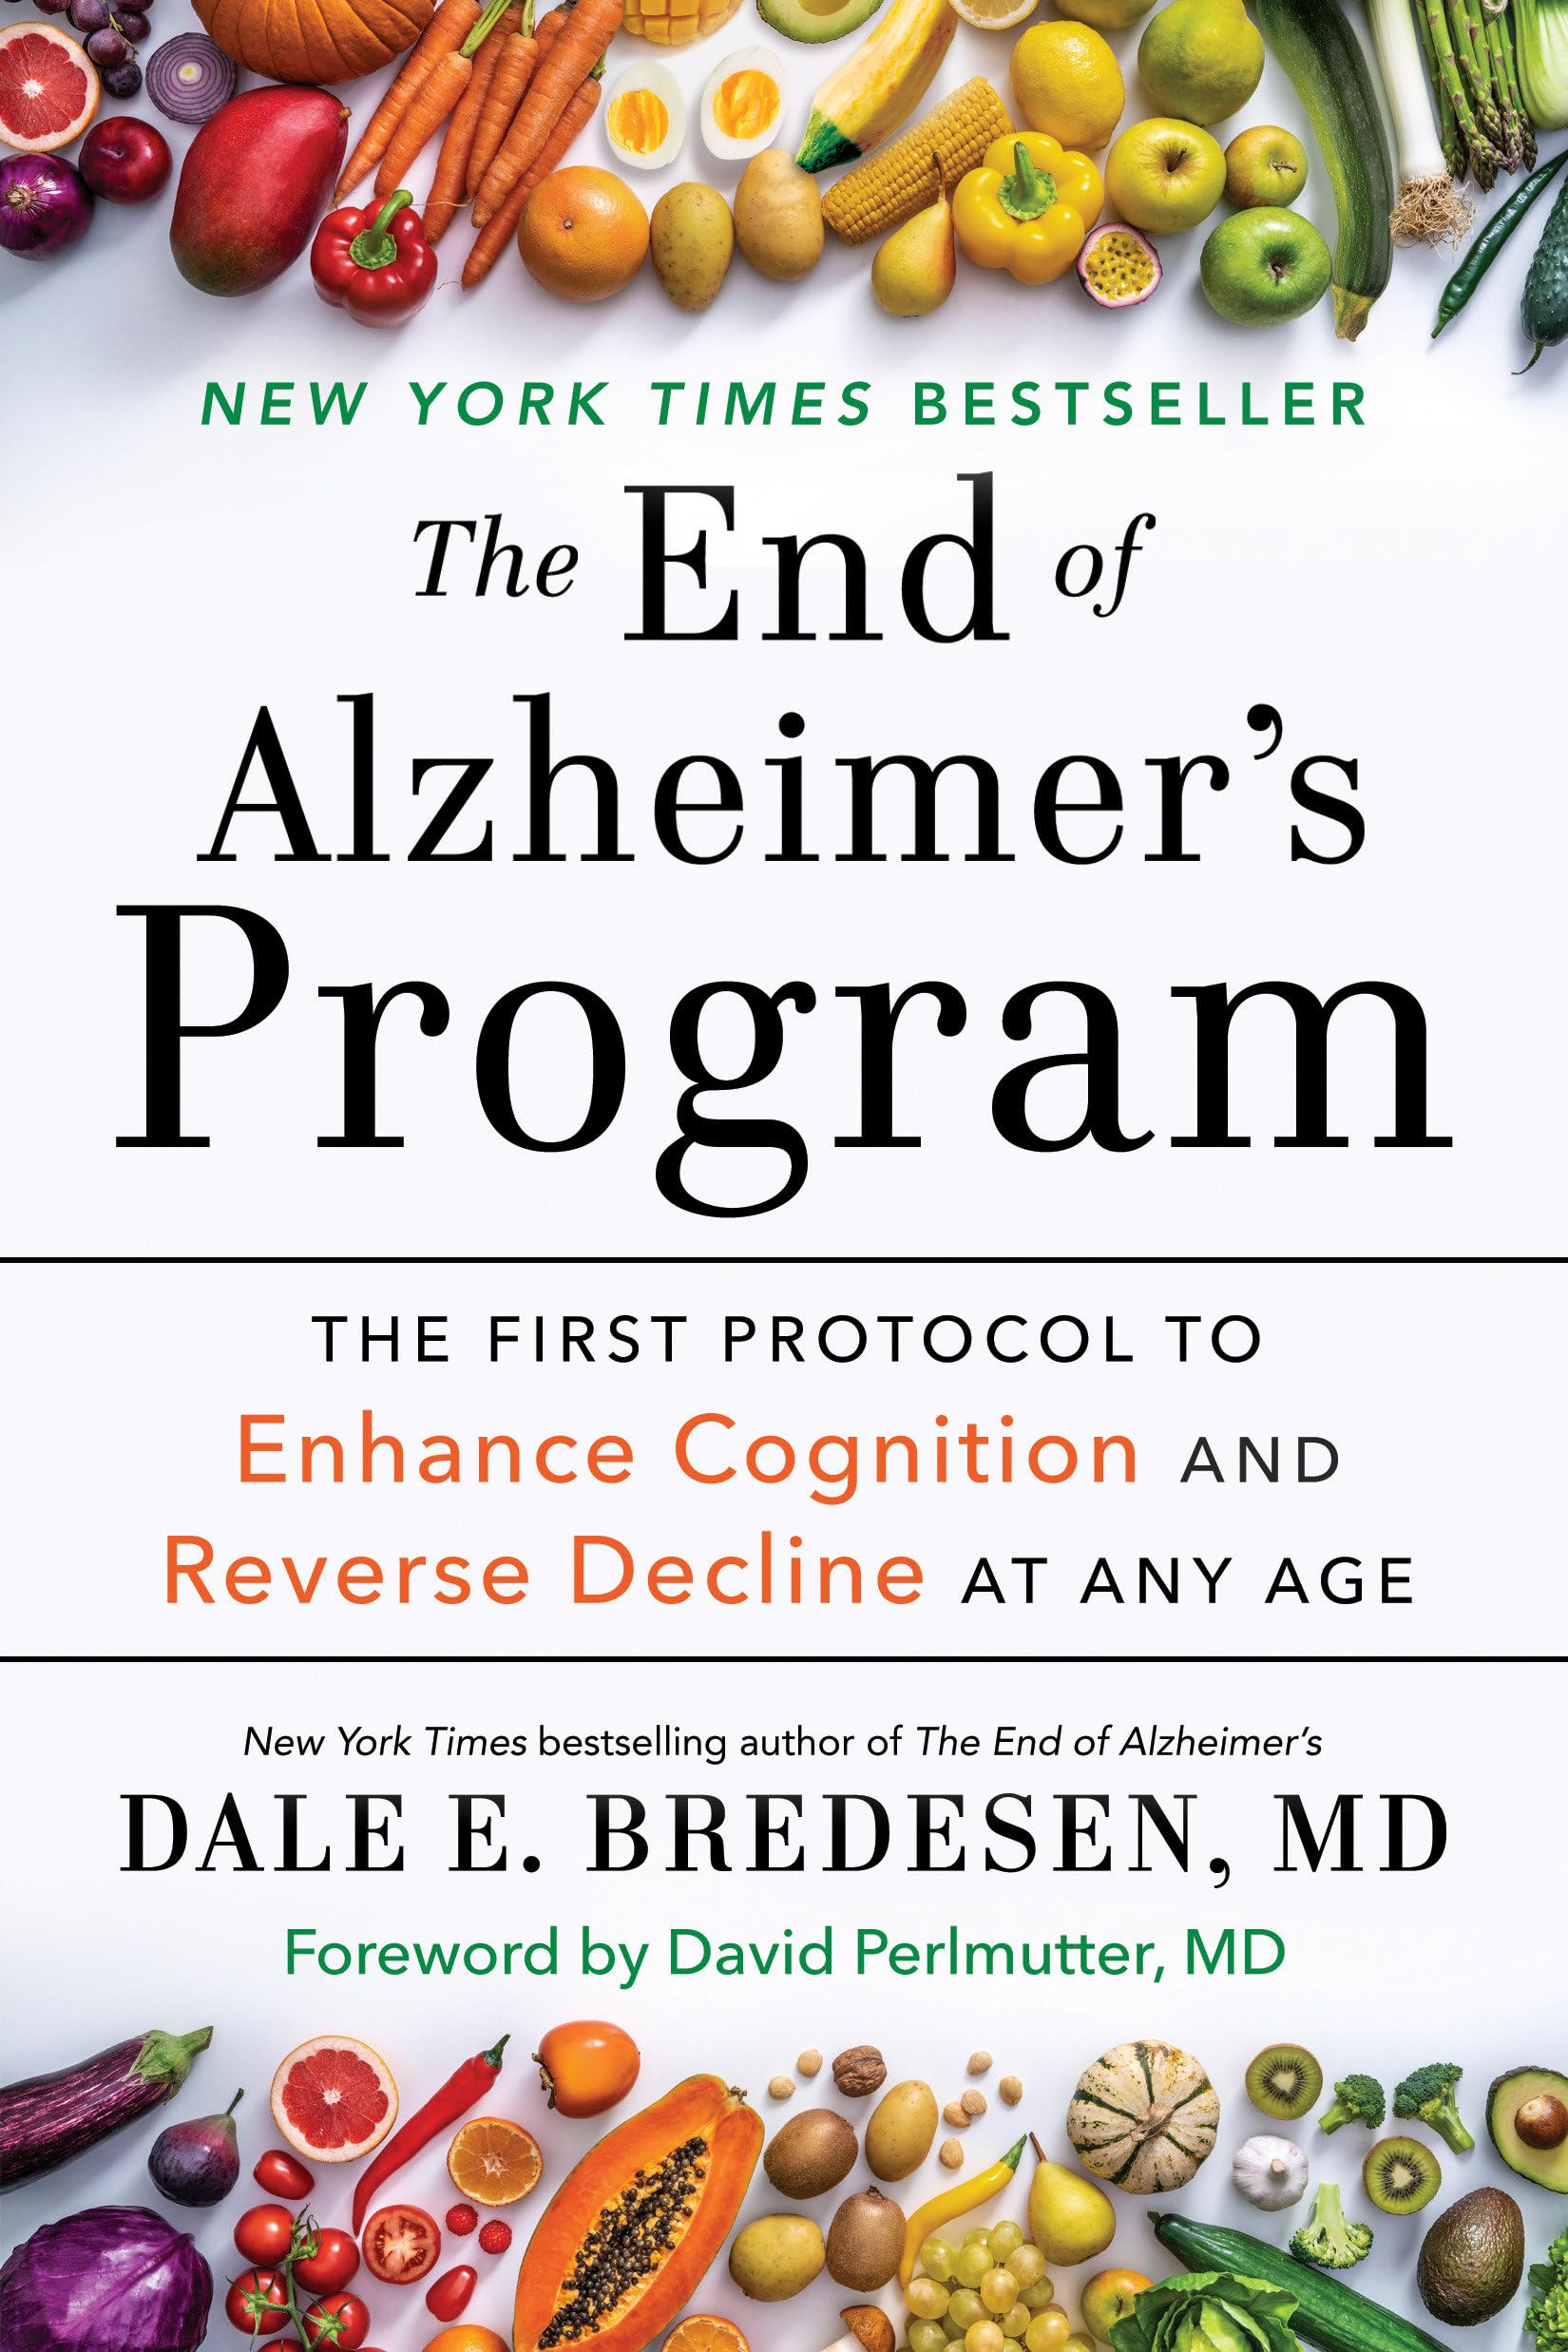 The End of Alzheimer's Program: The First Protocol to Enhance Cognition and Reverse Decline at Any Age by Bredesen, Dale